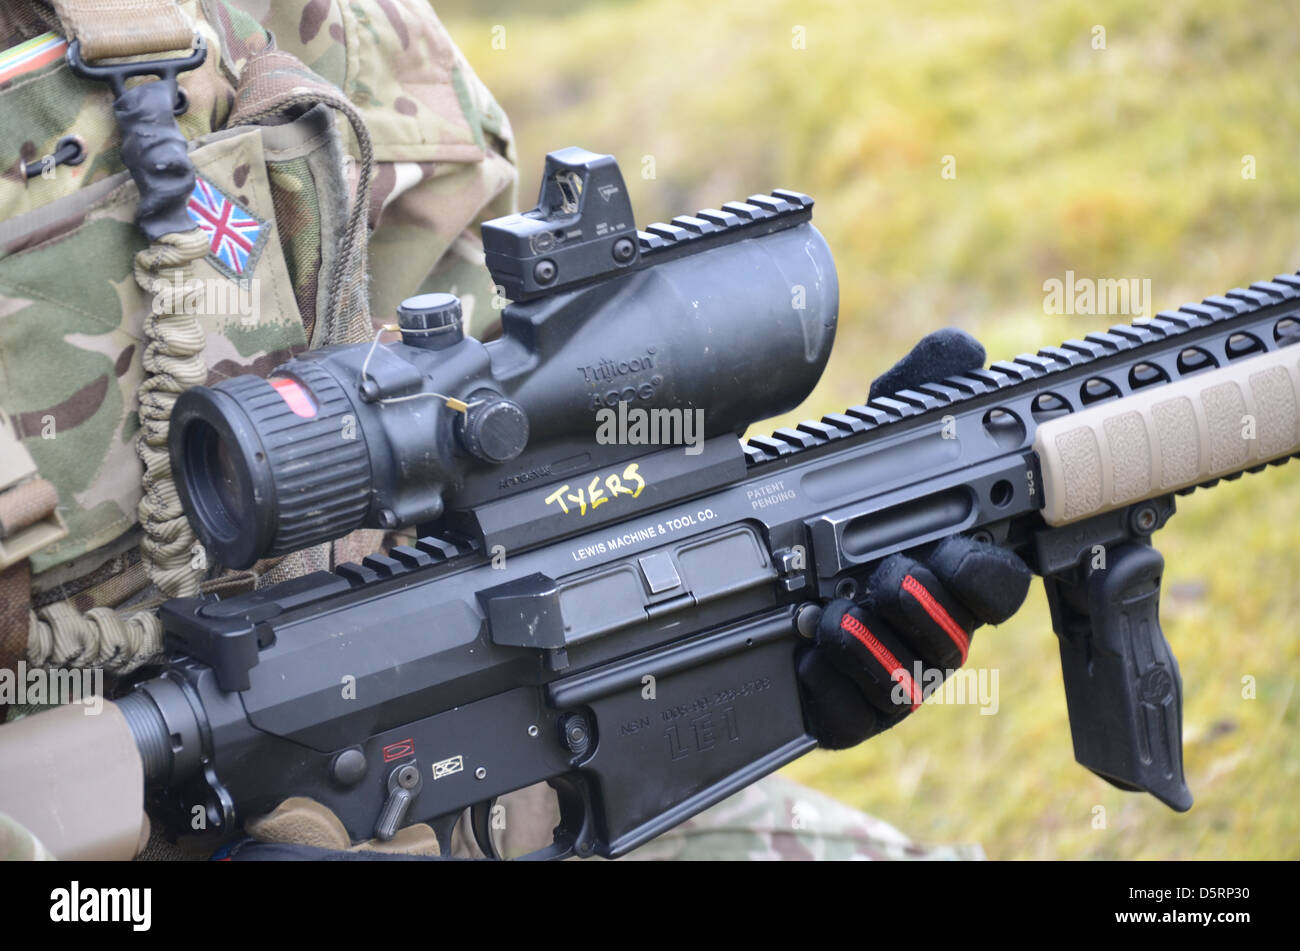 A sharpshooter rifle based on Law Enforcement Internationals 7.62-mm calibre LM7, Stock Photo